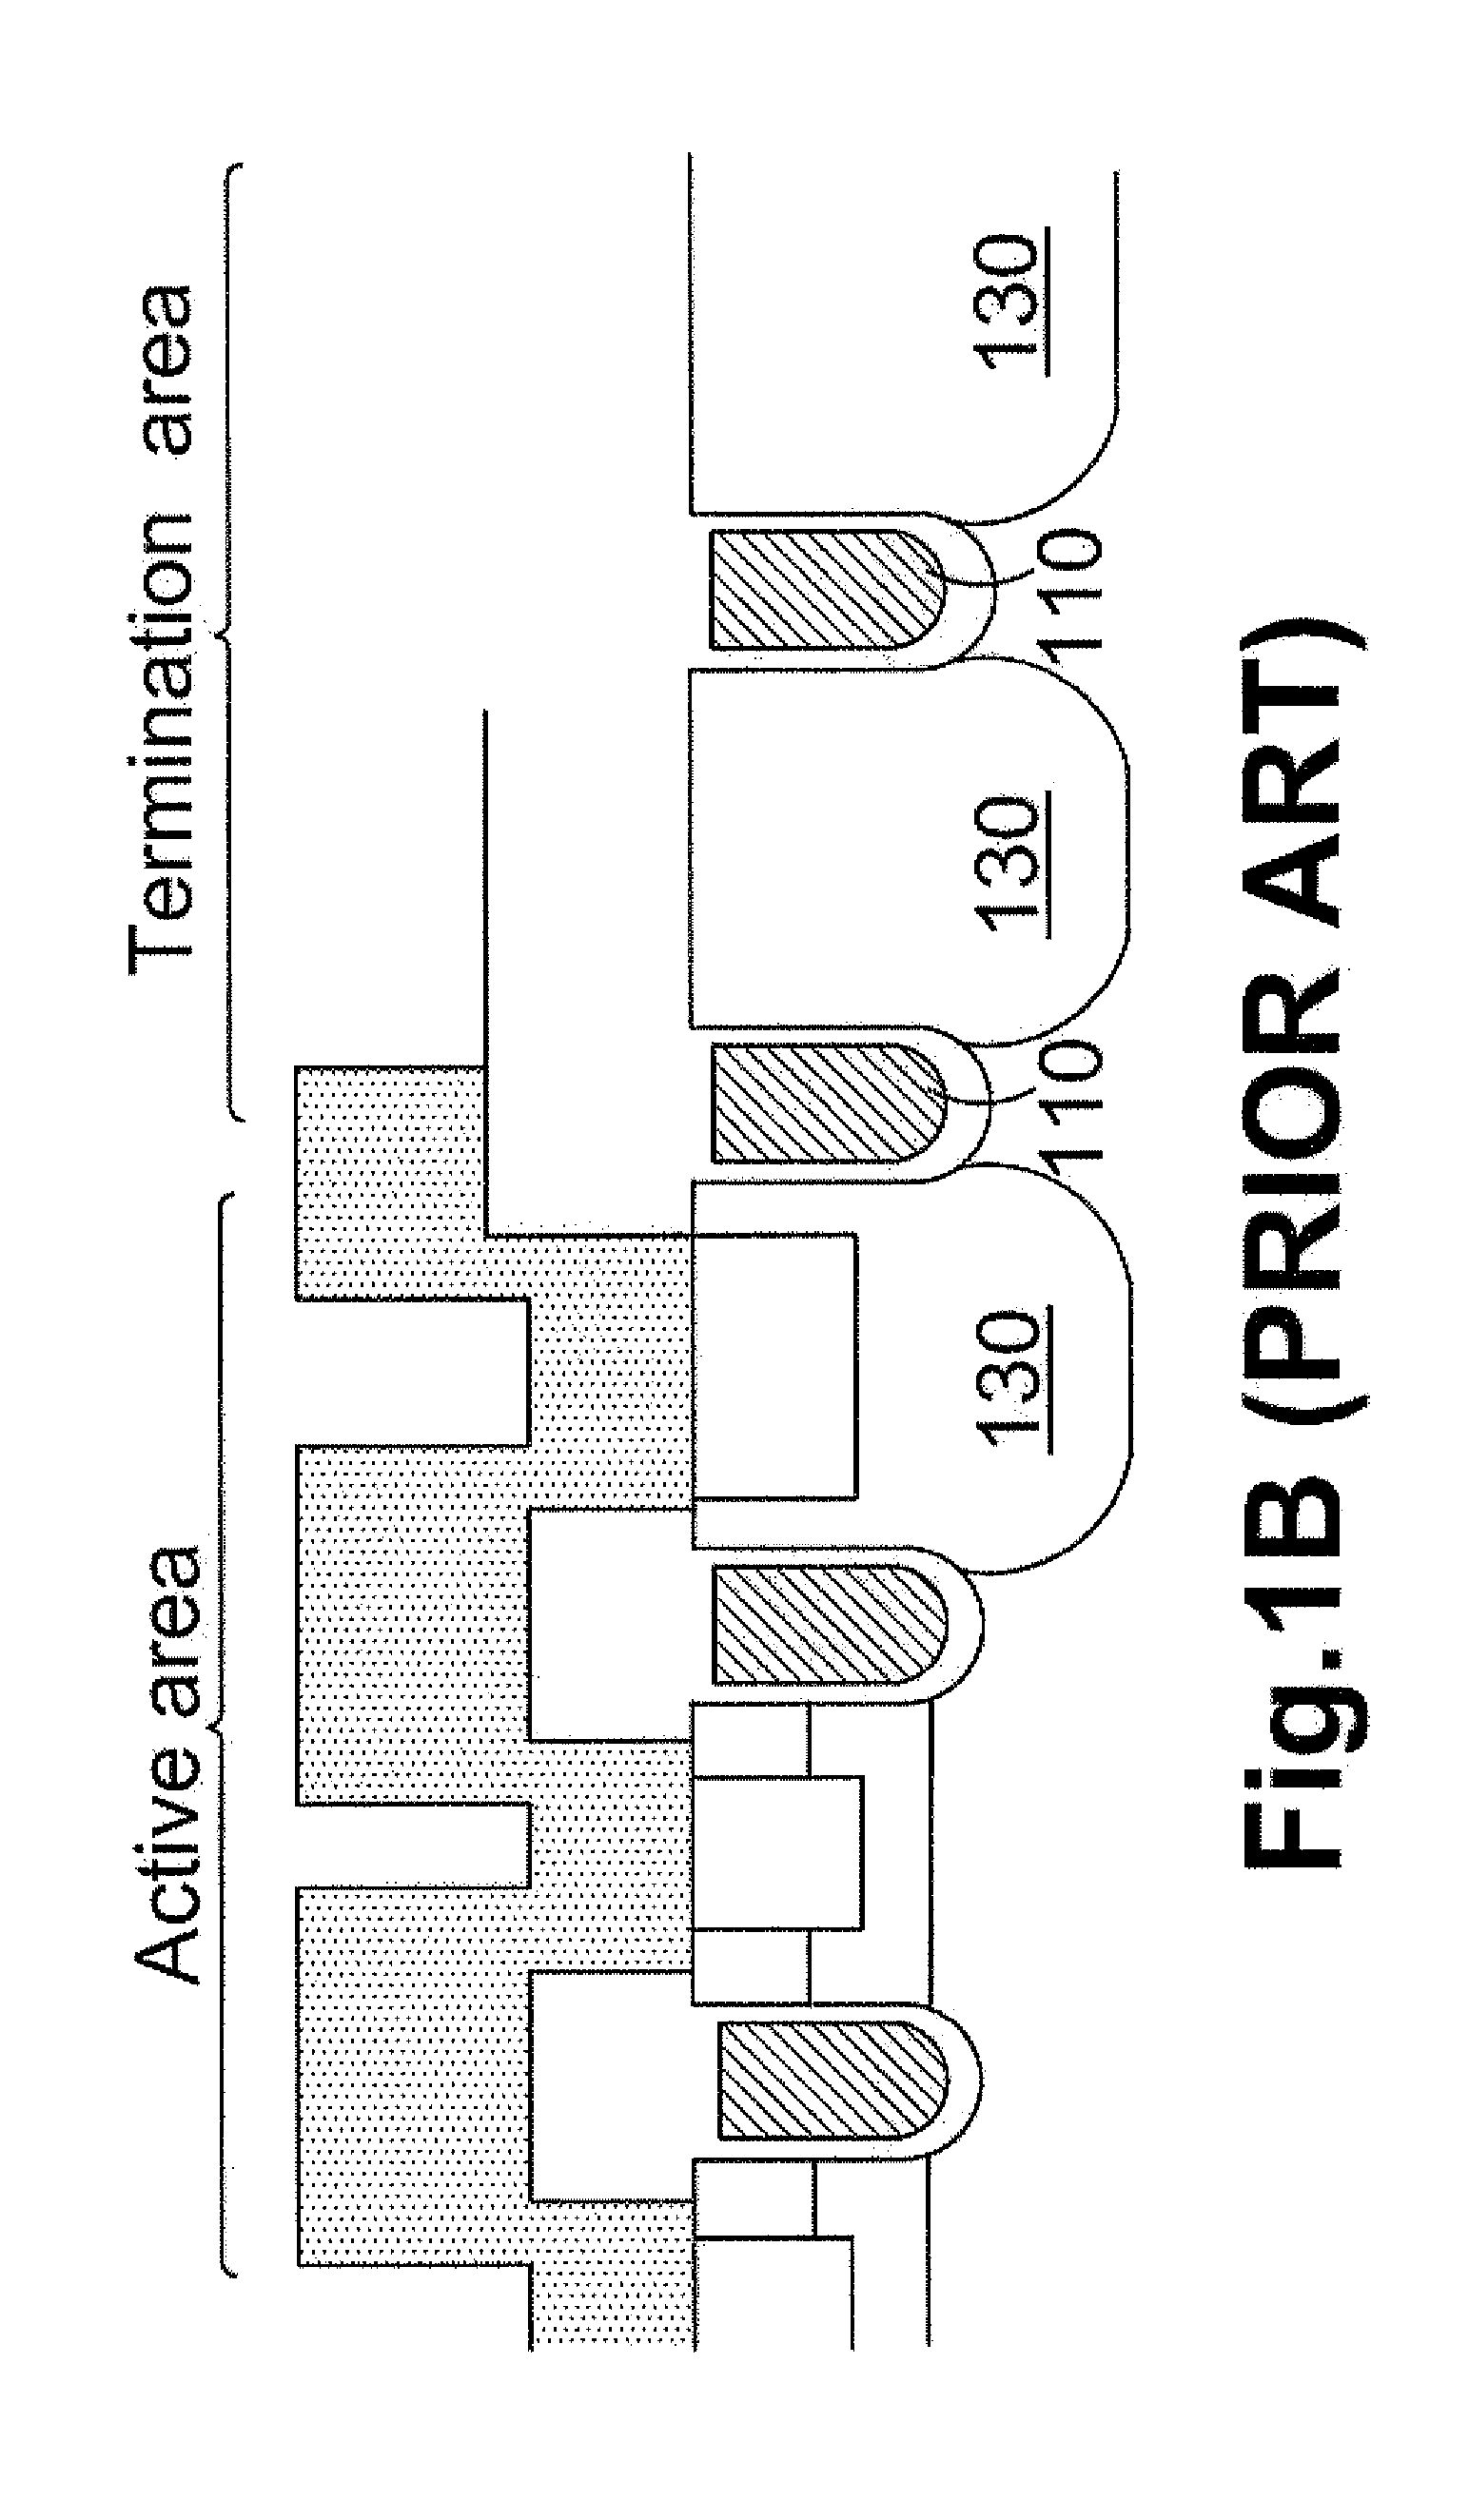 Shielded trench mosfet with multiple trenched floating gates as termination